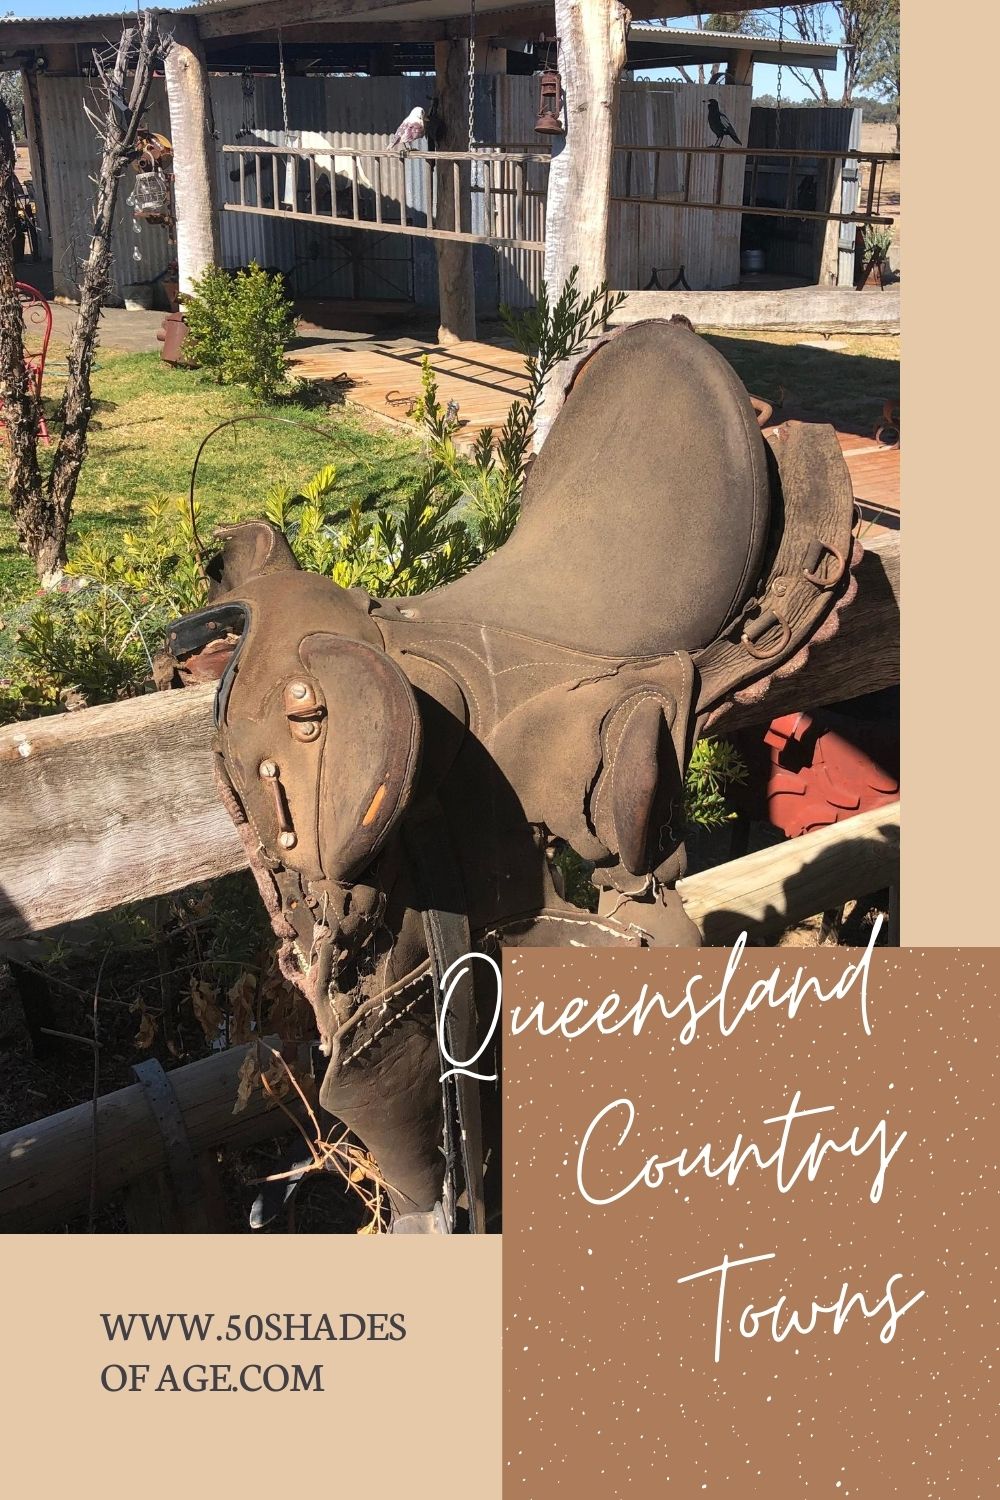 Queensland Country Towns